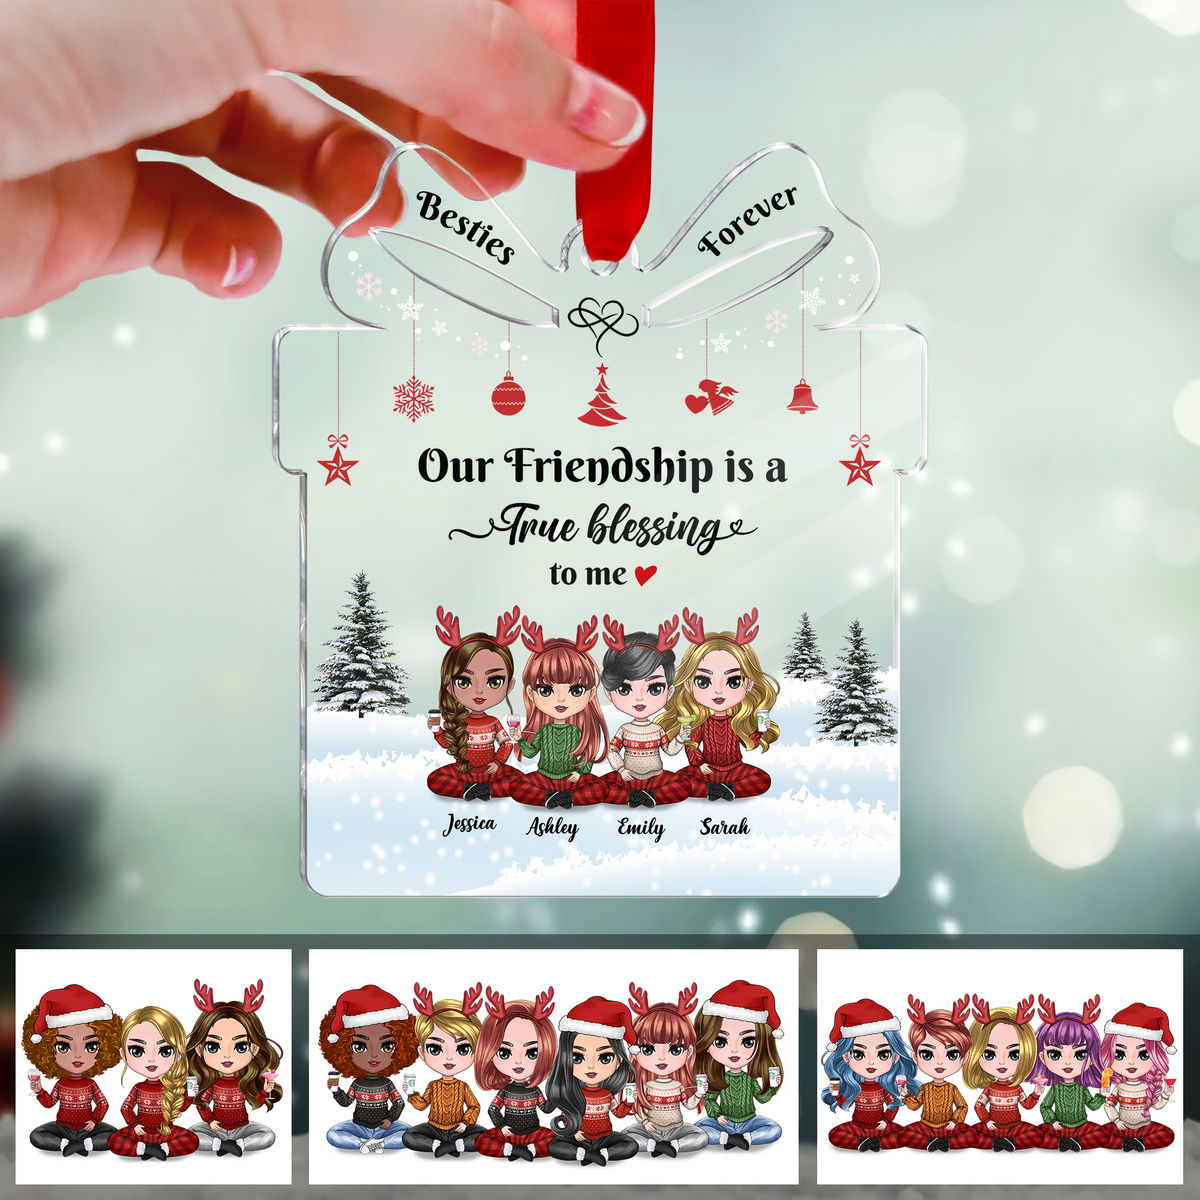 Transparent Christmas Ornament - Besties - Our friendship is a true blessing to me (Custom Acrylic Gift Shaped Ornament)